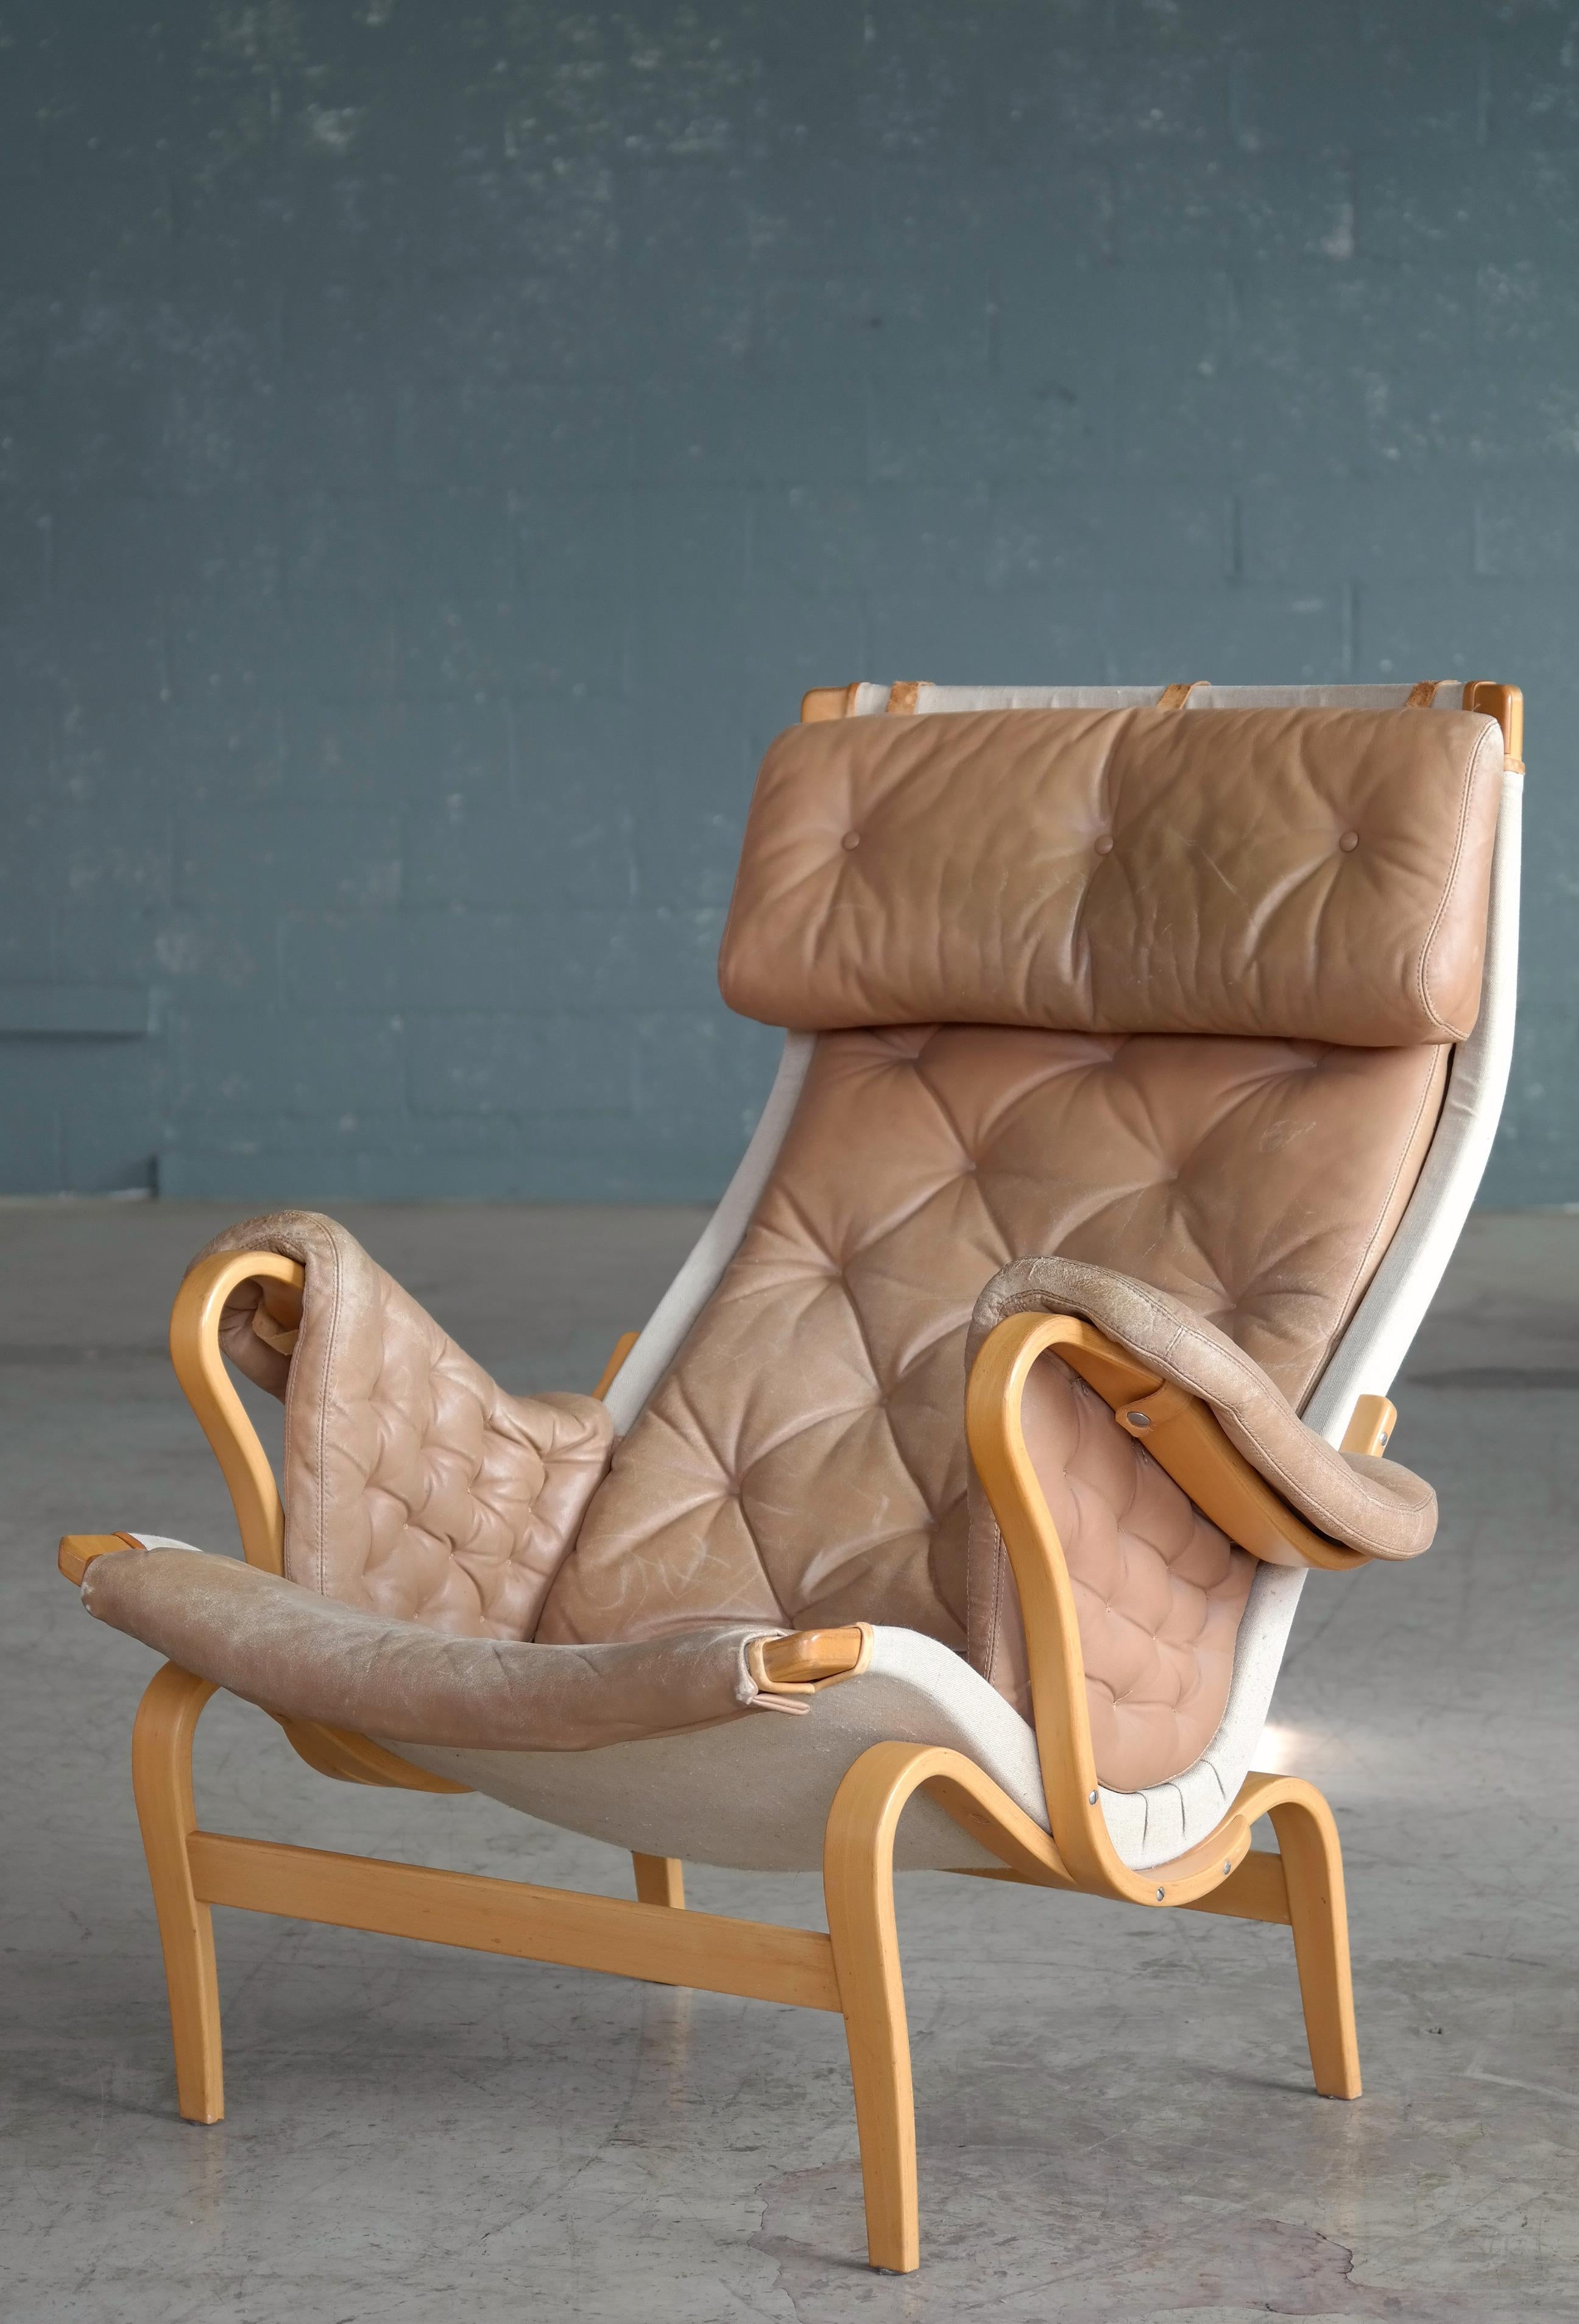 Mid-20th Century Pernilla Lounge Chair in Camel Colored Tufted Leather by Bruno Mathsson for DUX